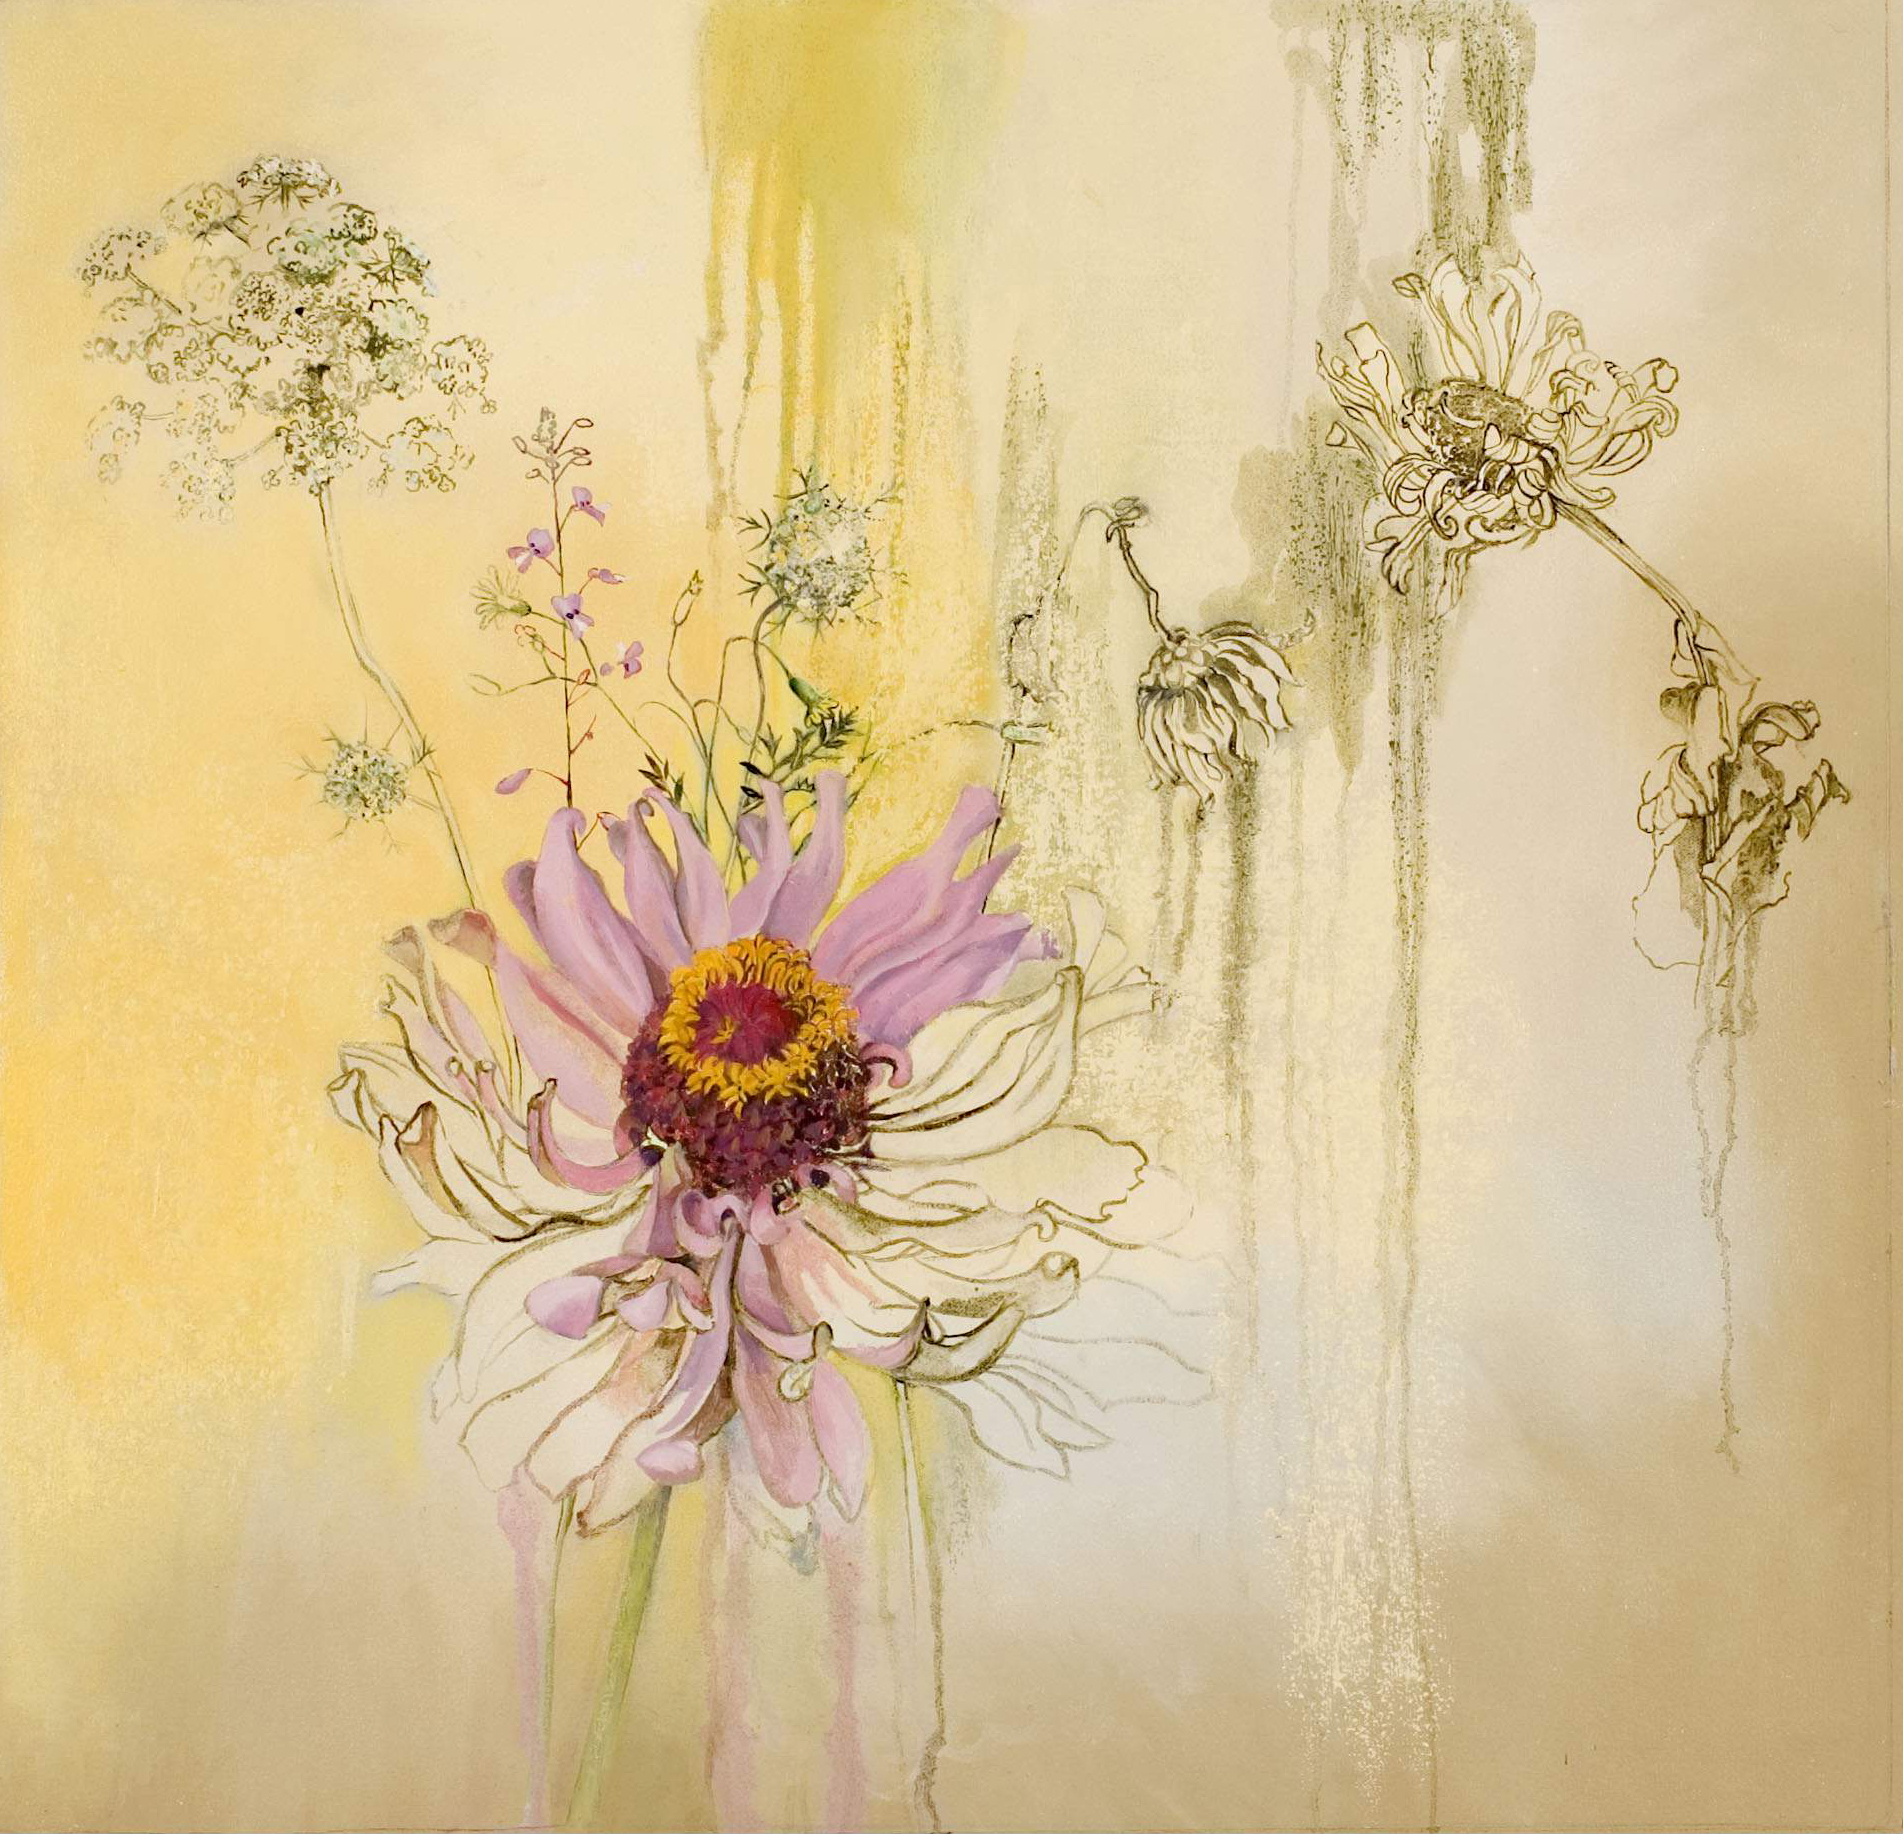 Zinnia and Queen Anne's Lace, oil and oil stick on canvas, 28 x 29 inches, 2007